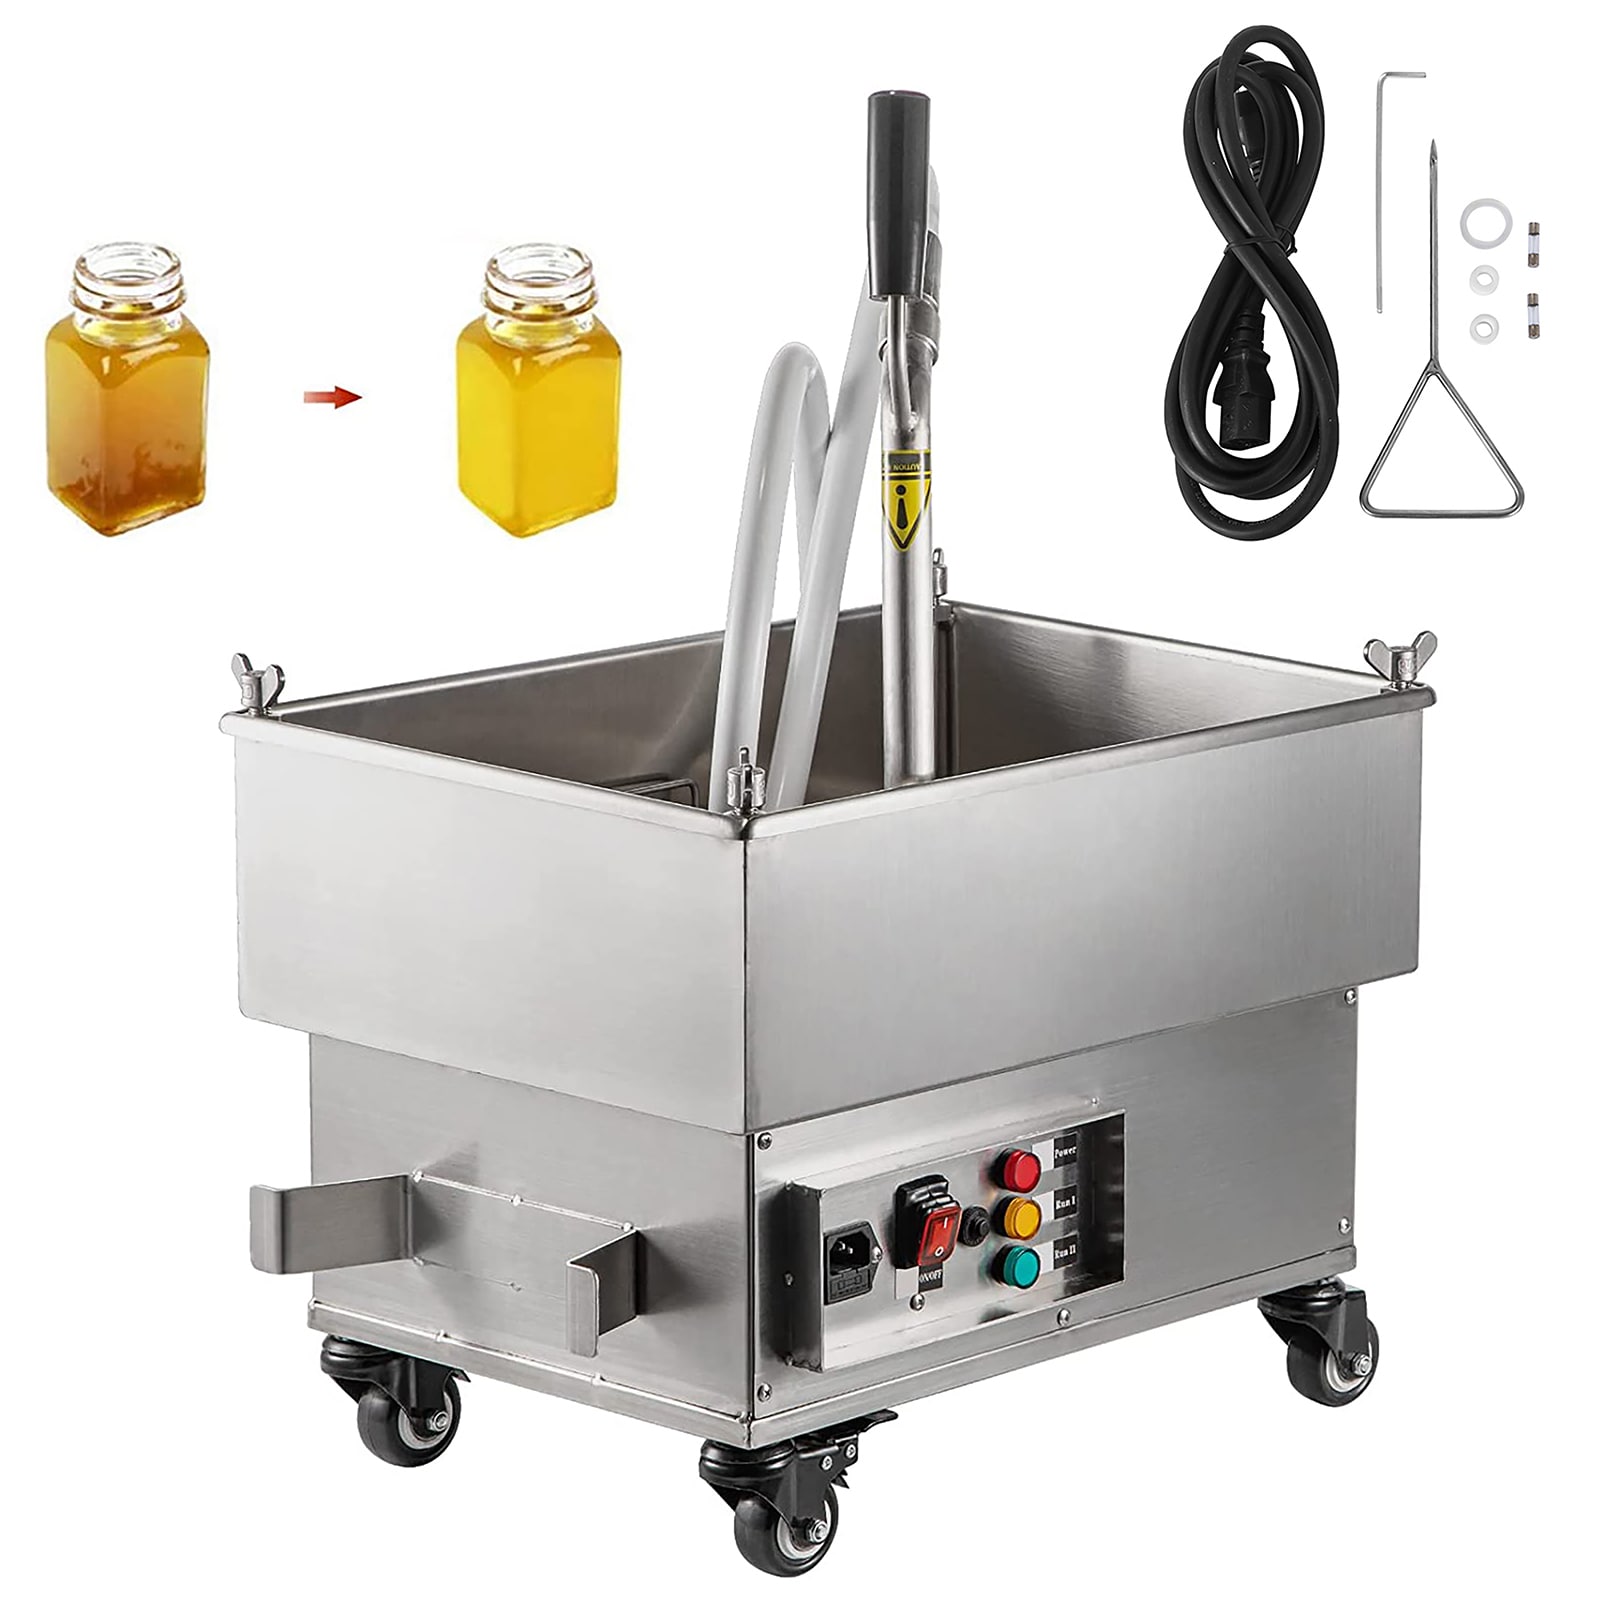 1.5 Qt. Electric Immersion Deep Fryer with Lid